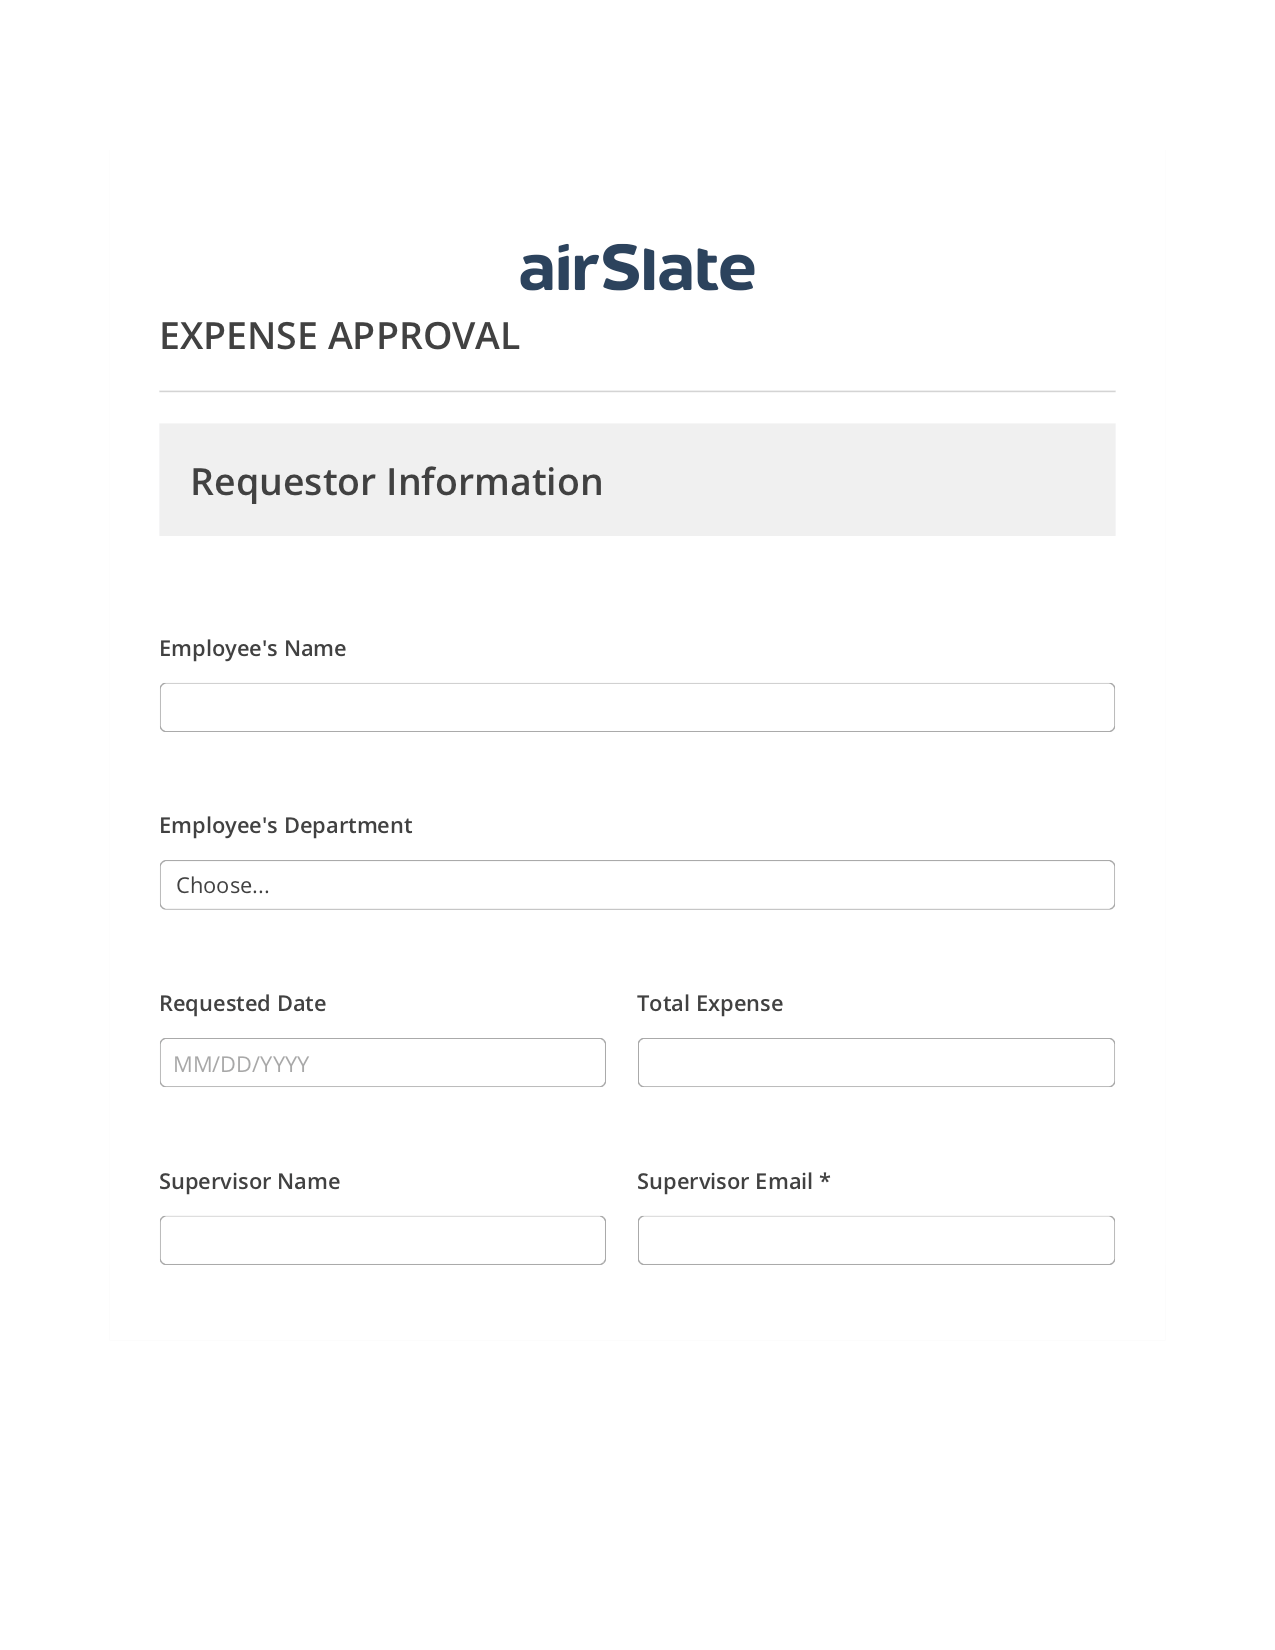 Expense Approval Flow Open under a Role Bot